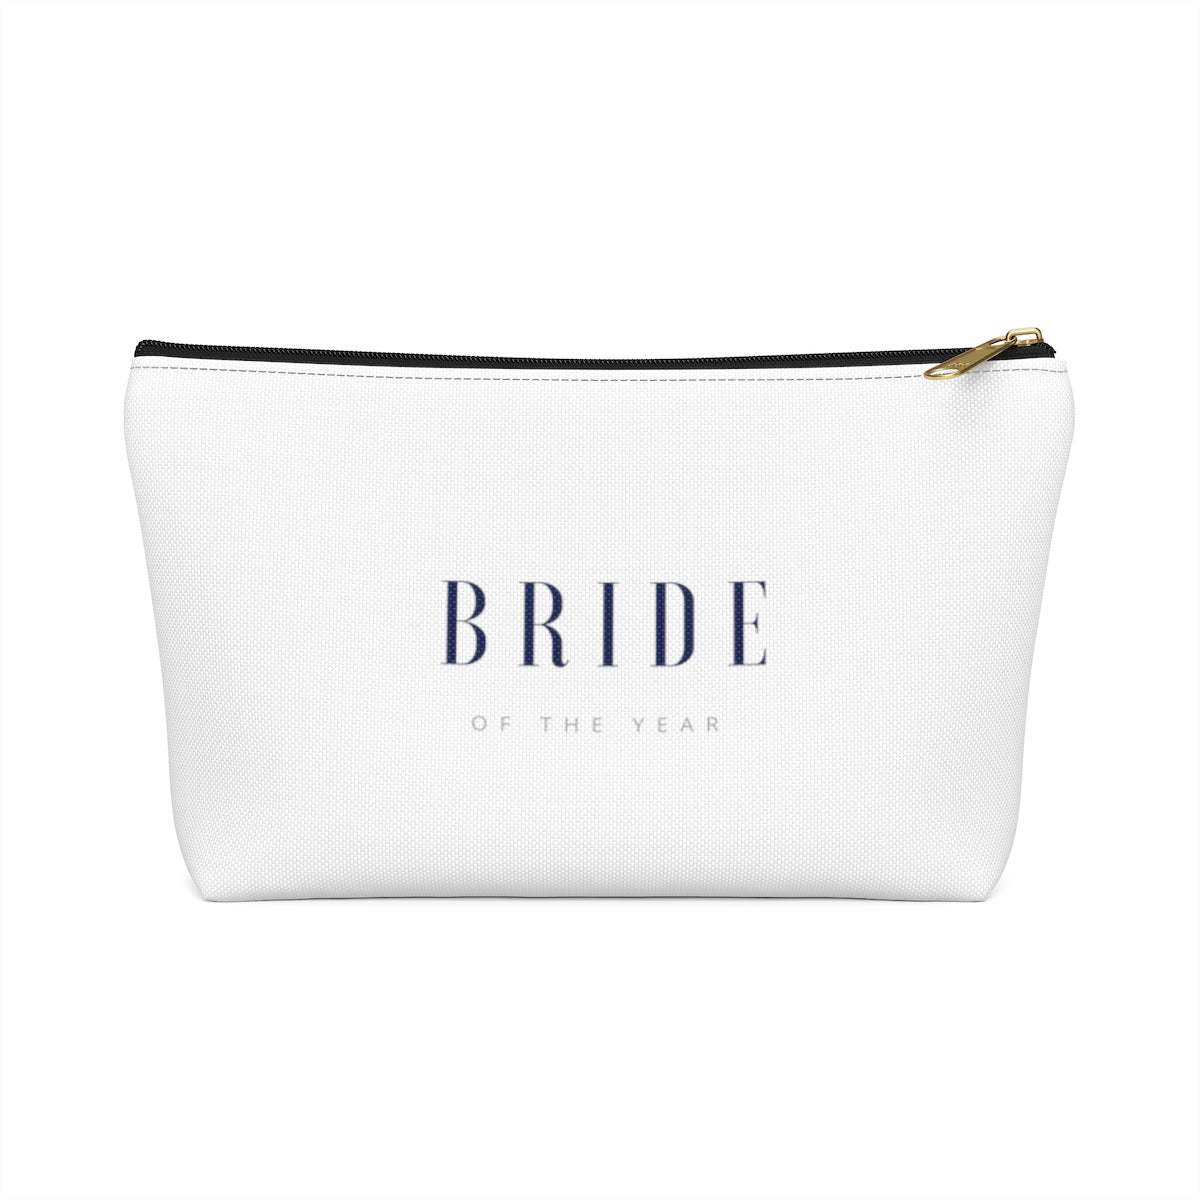 Bride of the Year Cosmetic Travel Bag - Crystal Flower